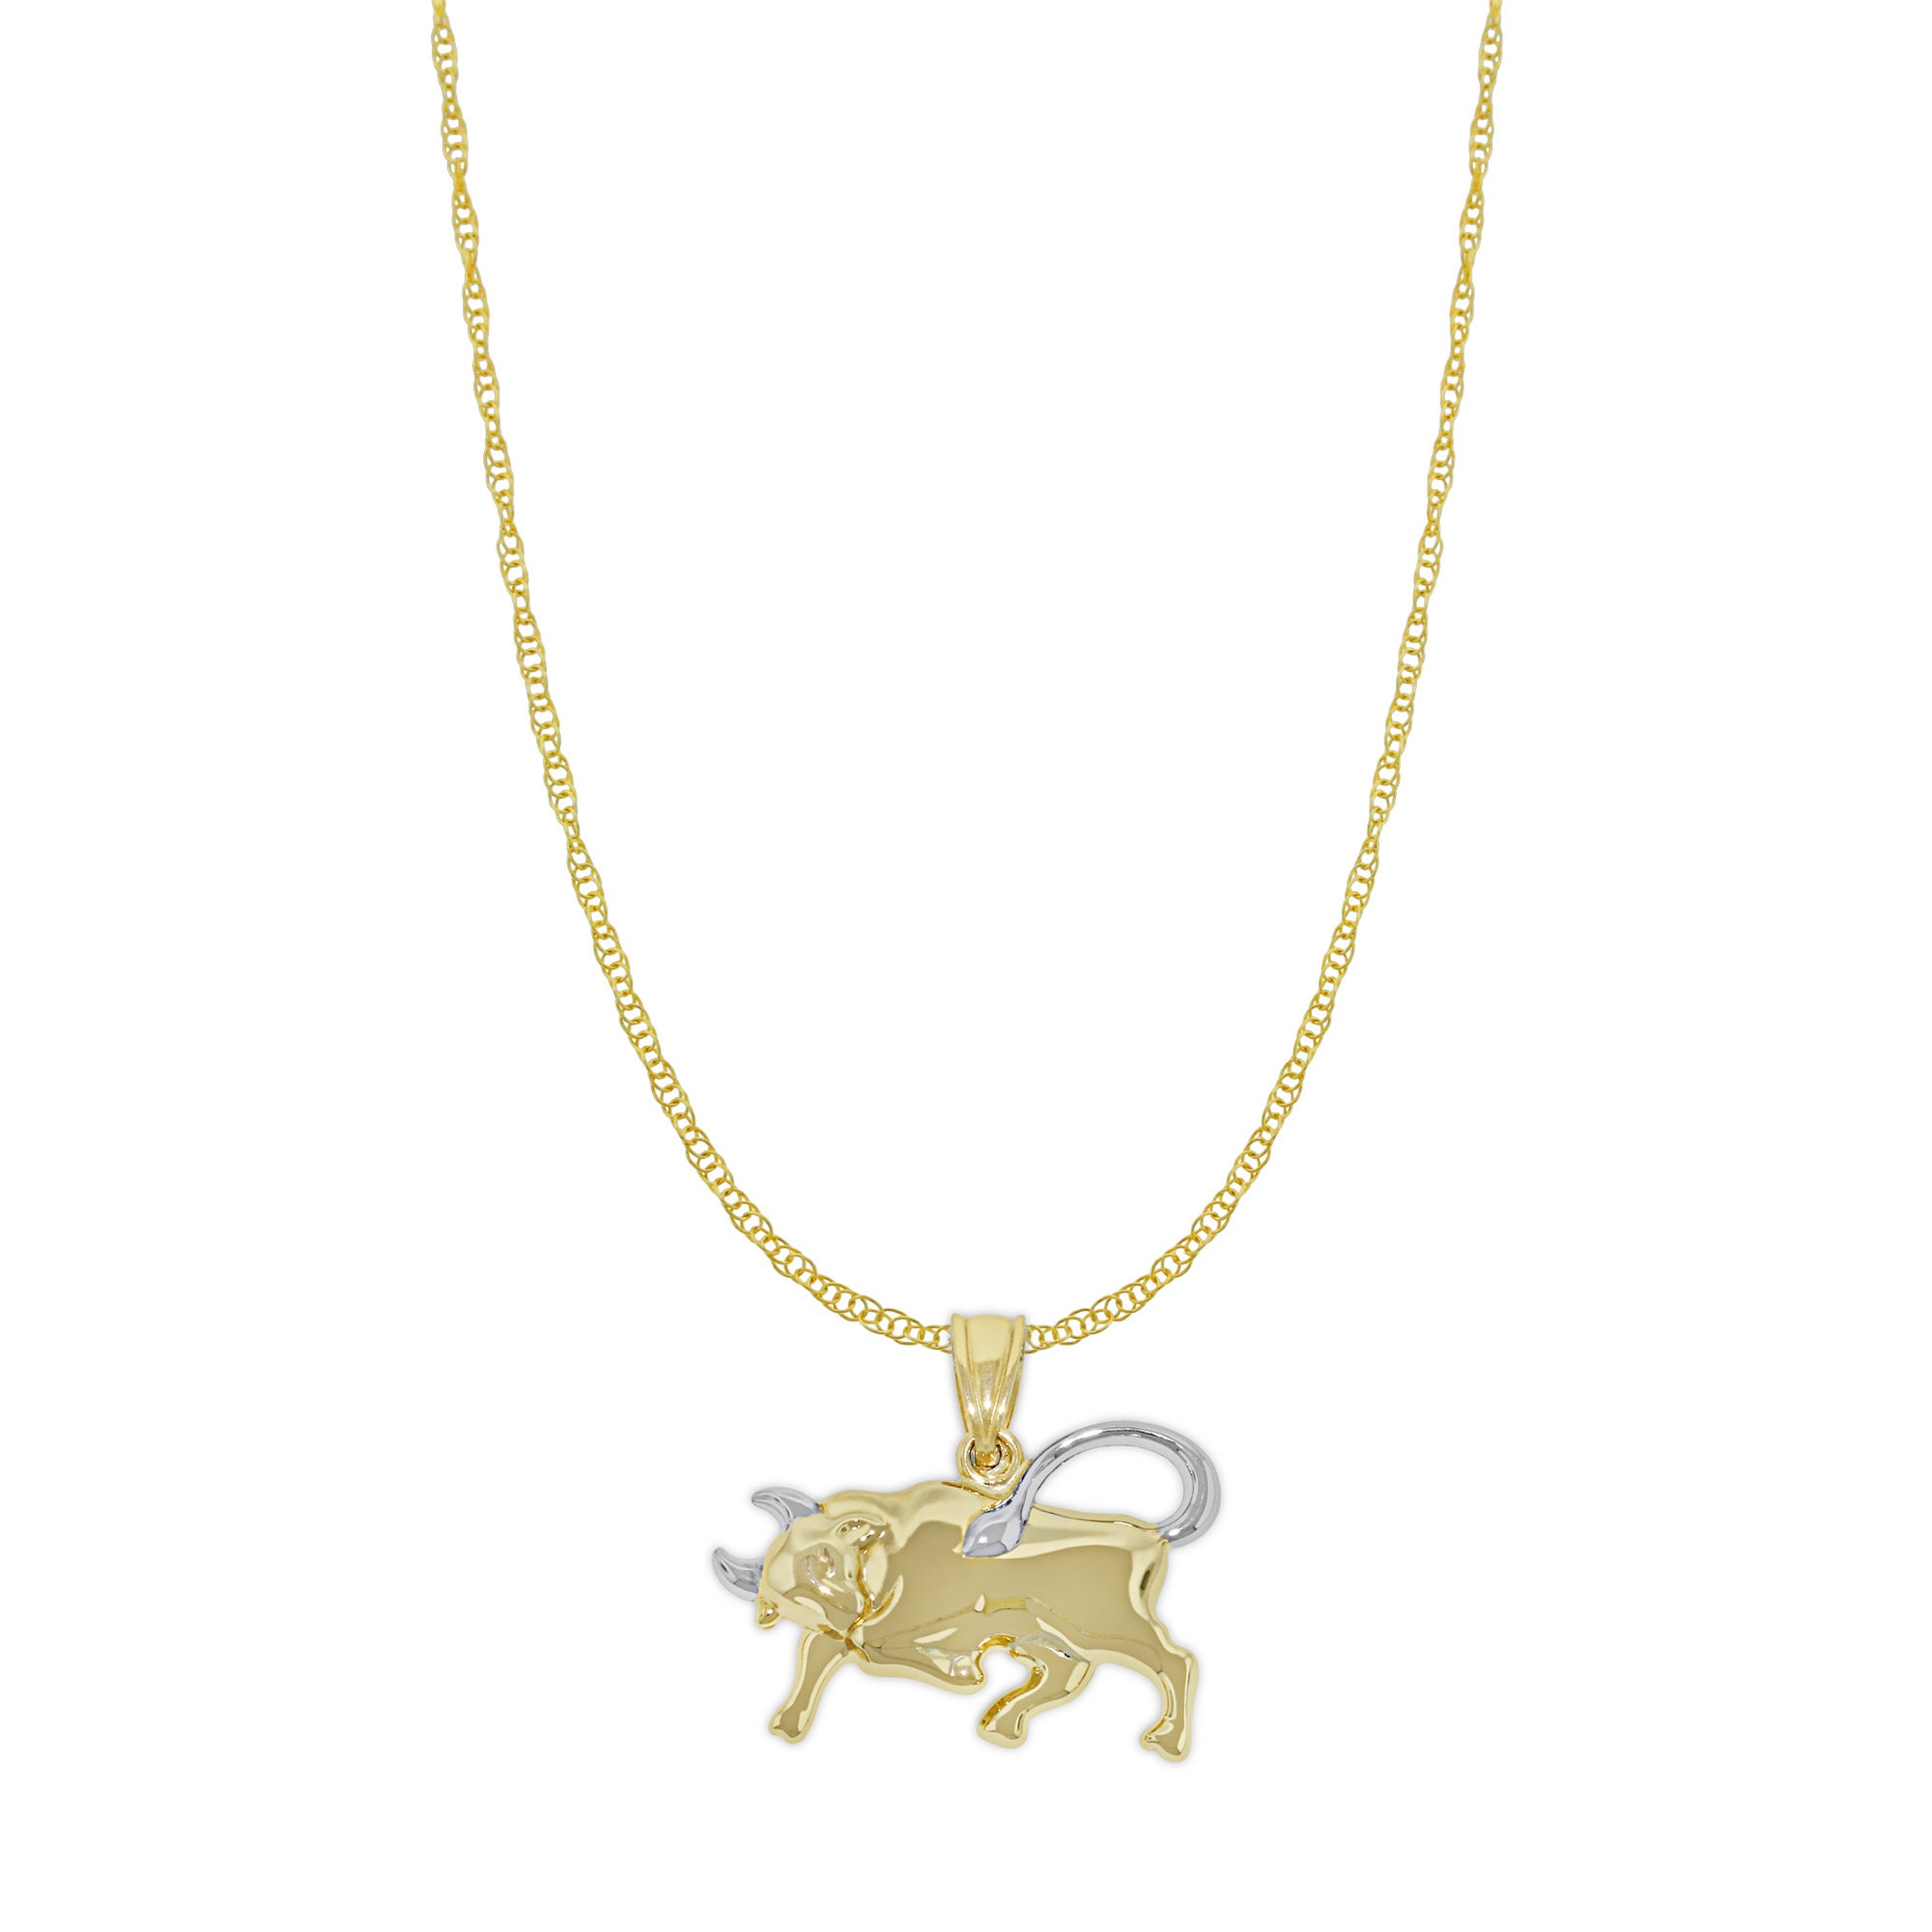 Taurus Zodiac Necklace in 10kt Yellow Gold